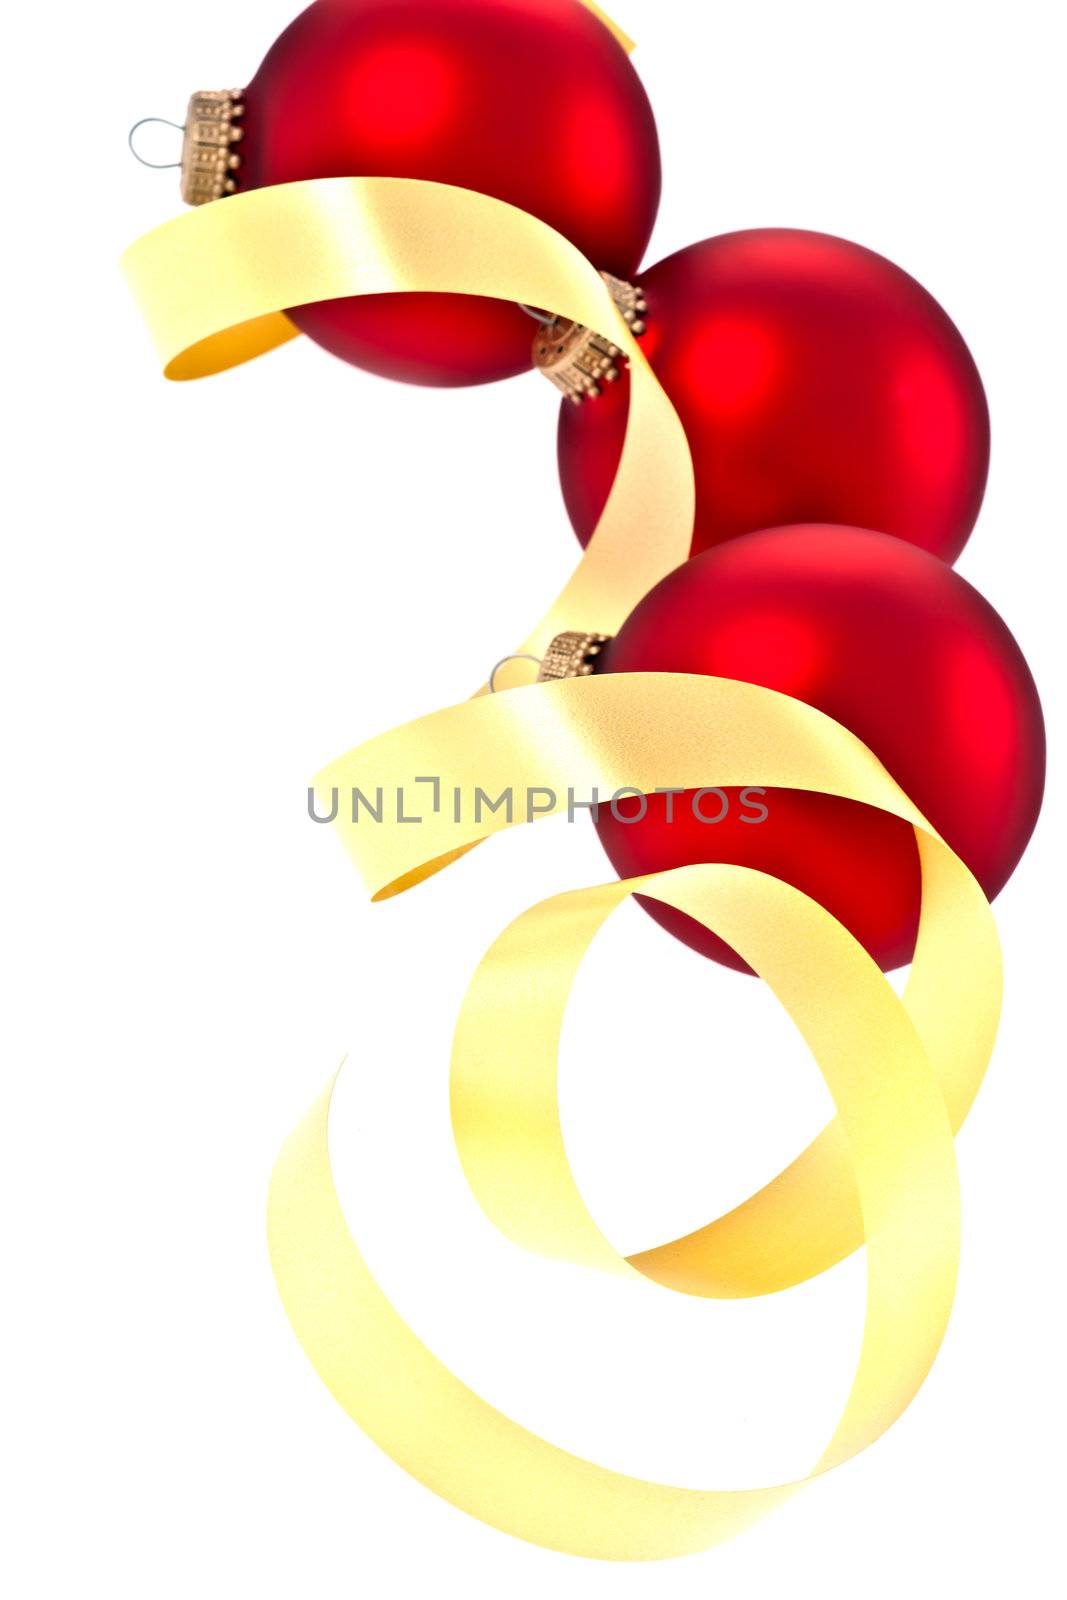 traditional Christmas balls and a yellow curly ribbon isolated on a white background